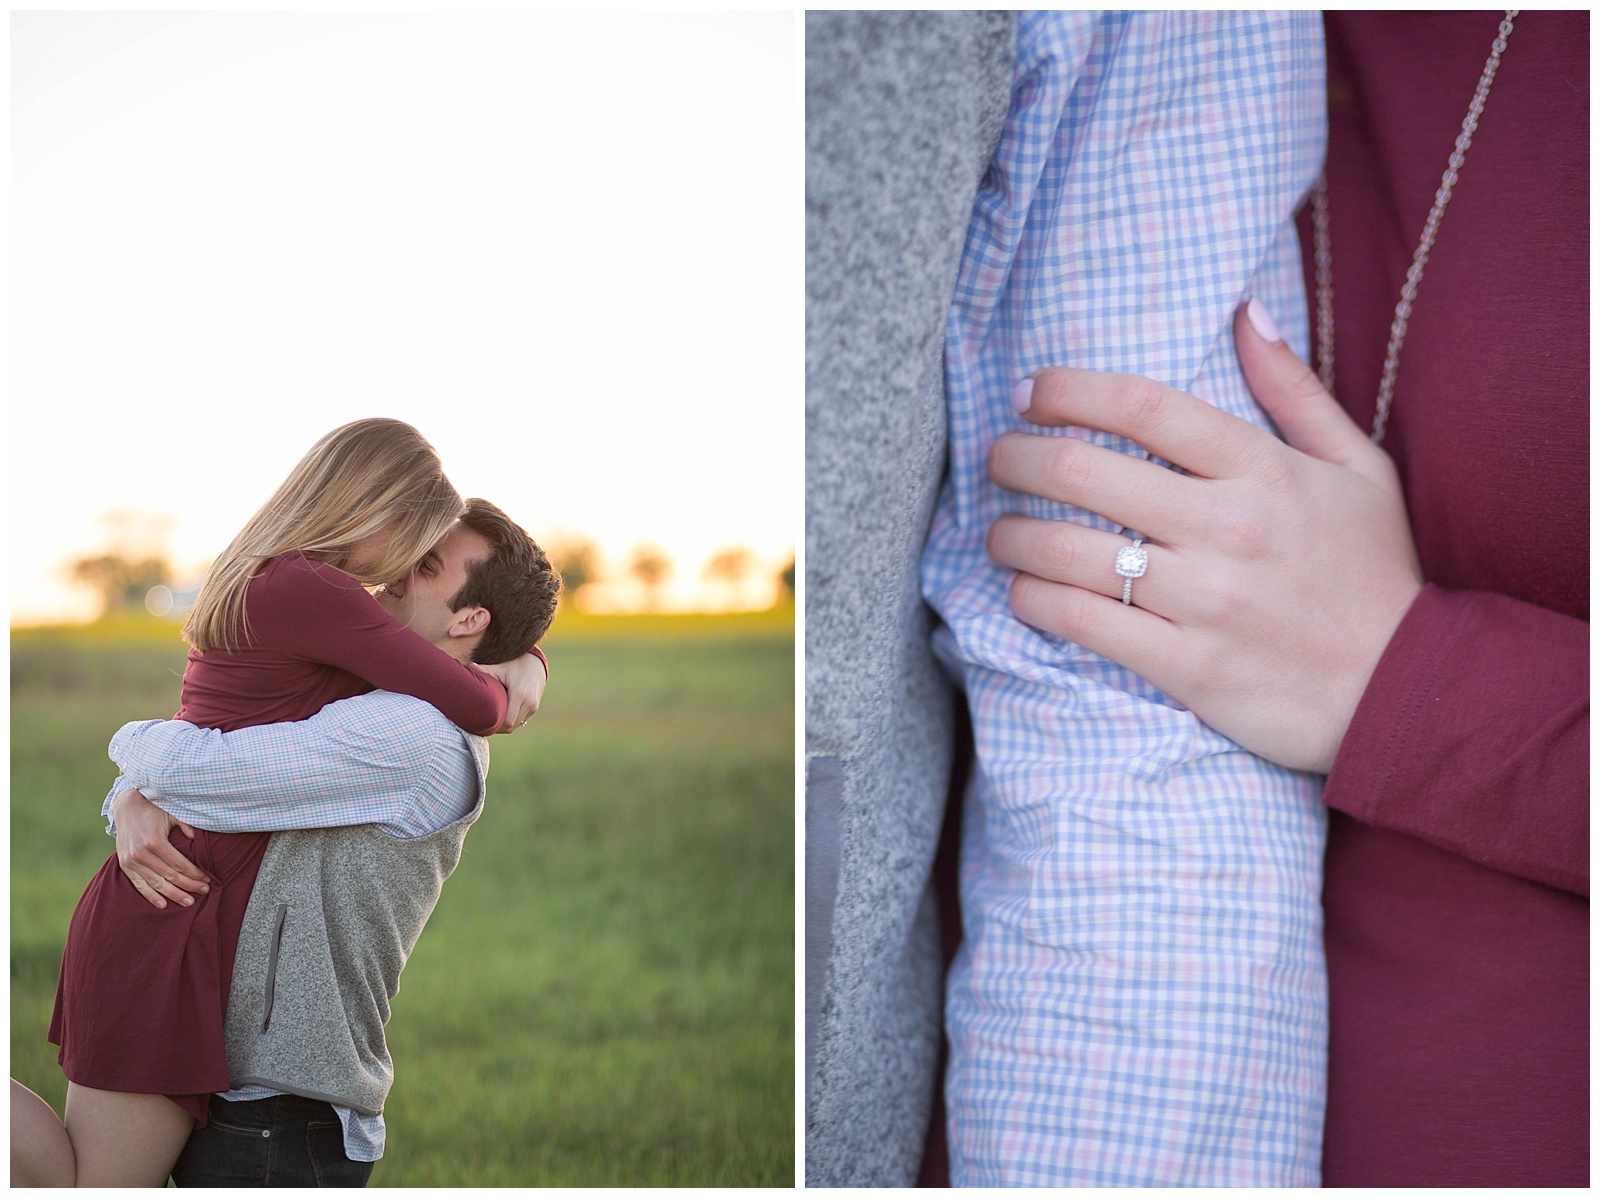 Oxford Engagement Session, Miami University | Monica Brown Photography | monicabrownphoto.com